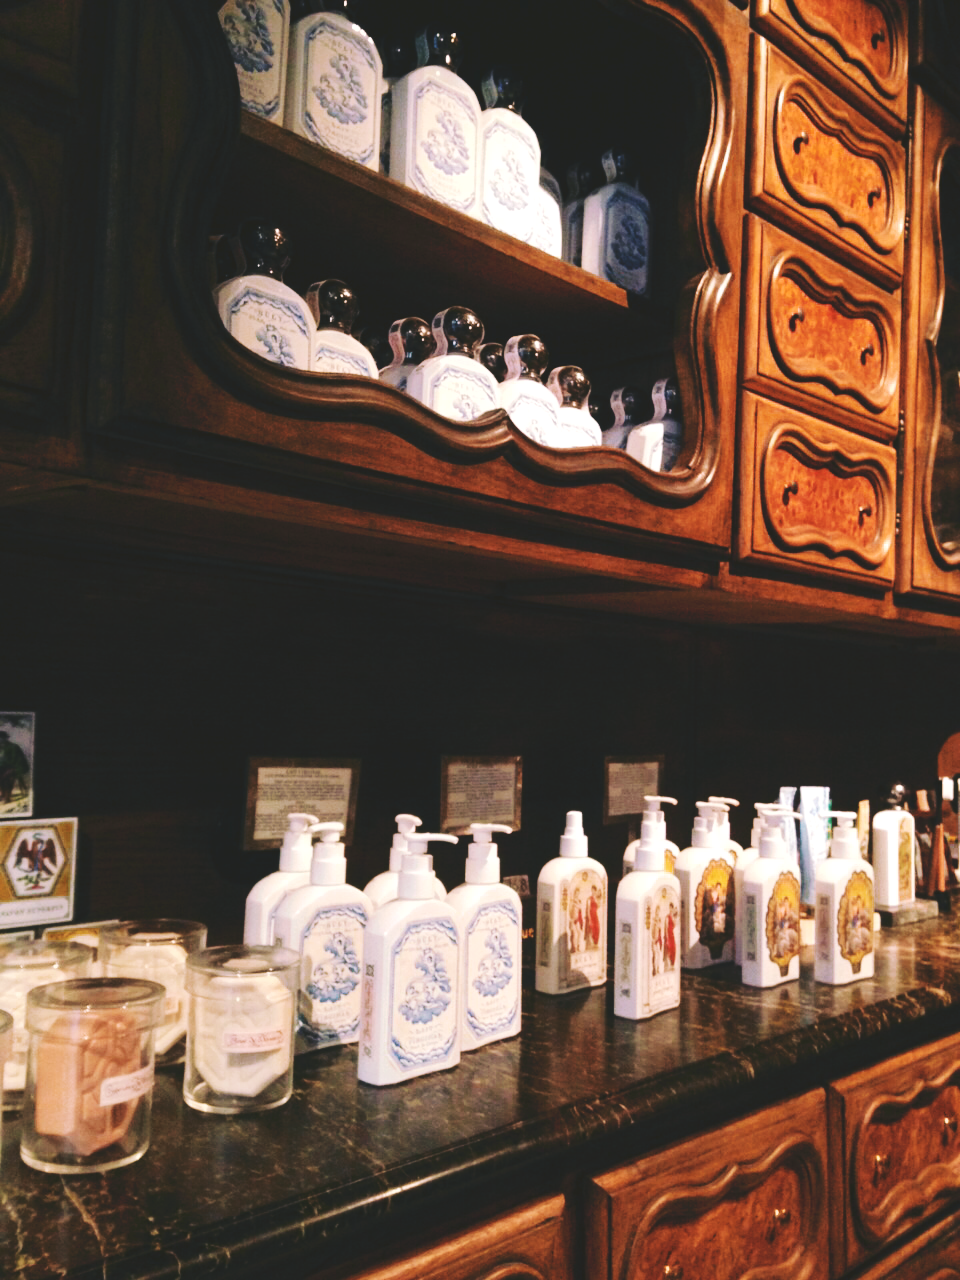 Parisian apothecary Buly 1803 opens first international store in Taipei